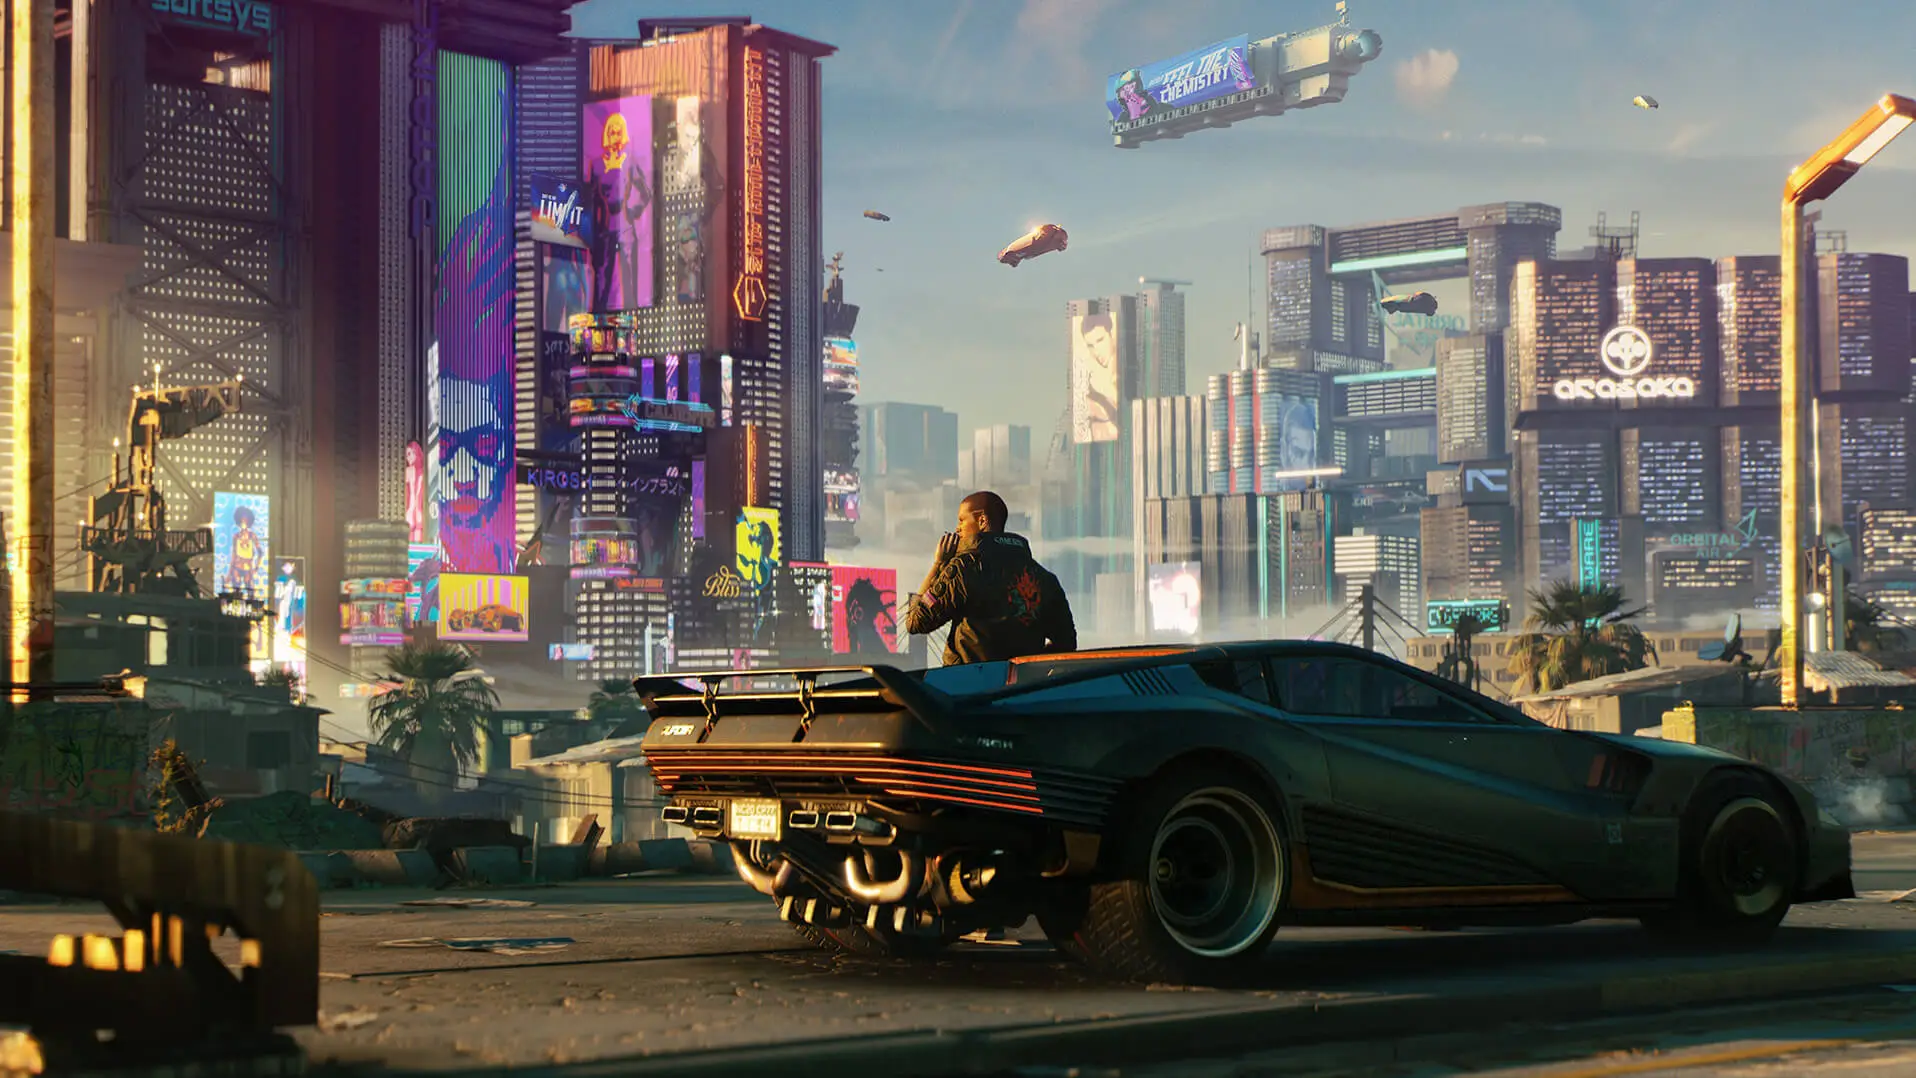 Cyberpunk 2077 - It's finally happening, are we about to witness a revolution in gaming?